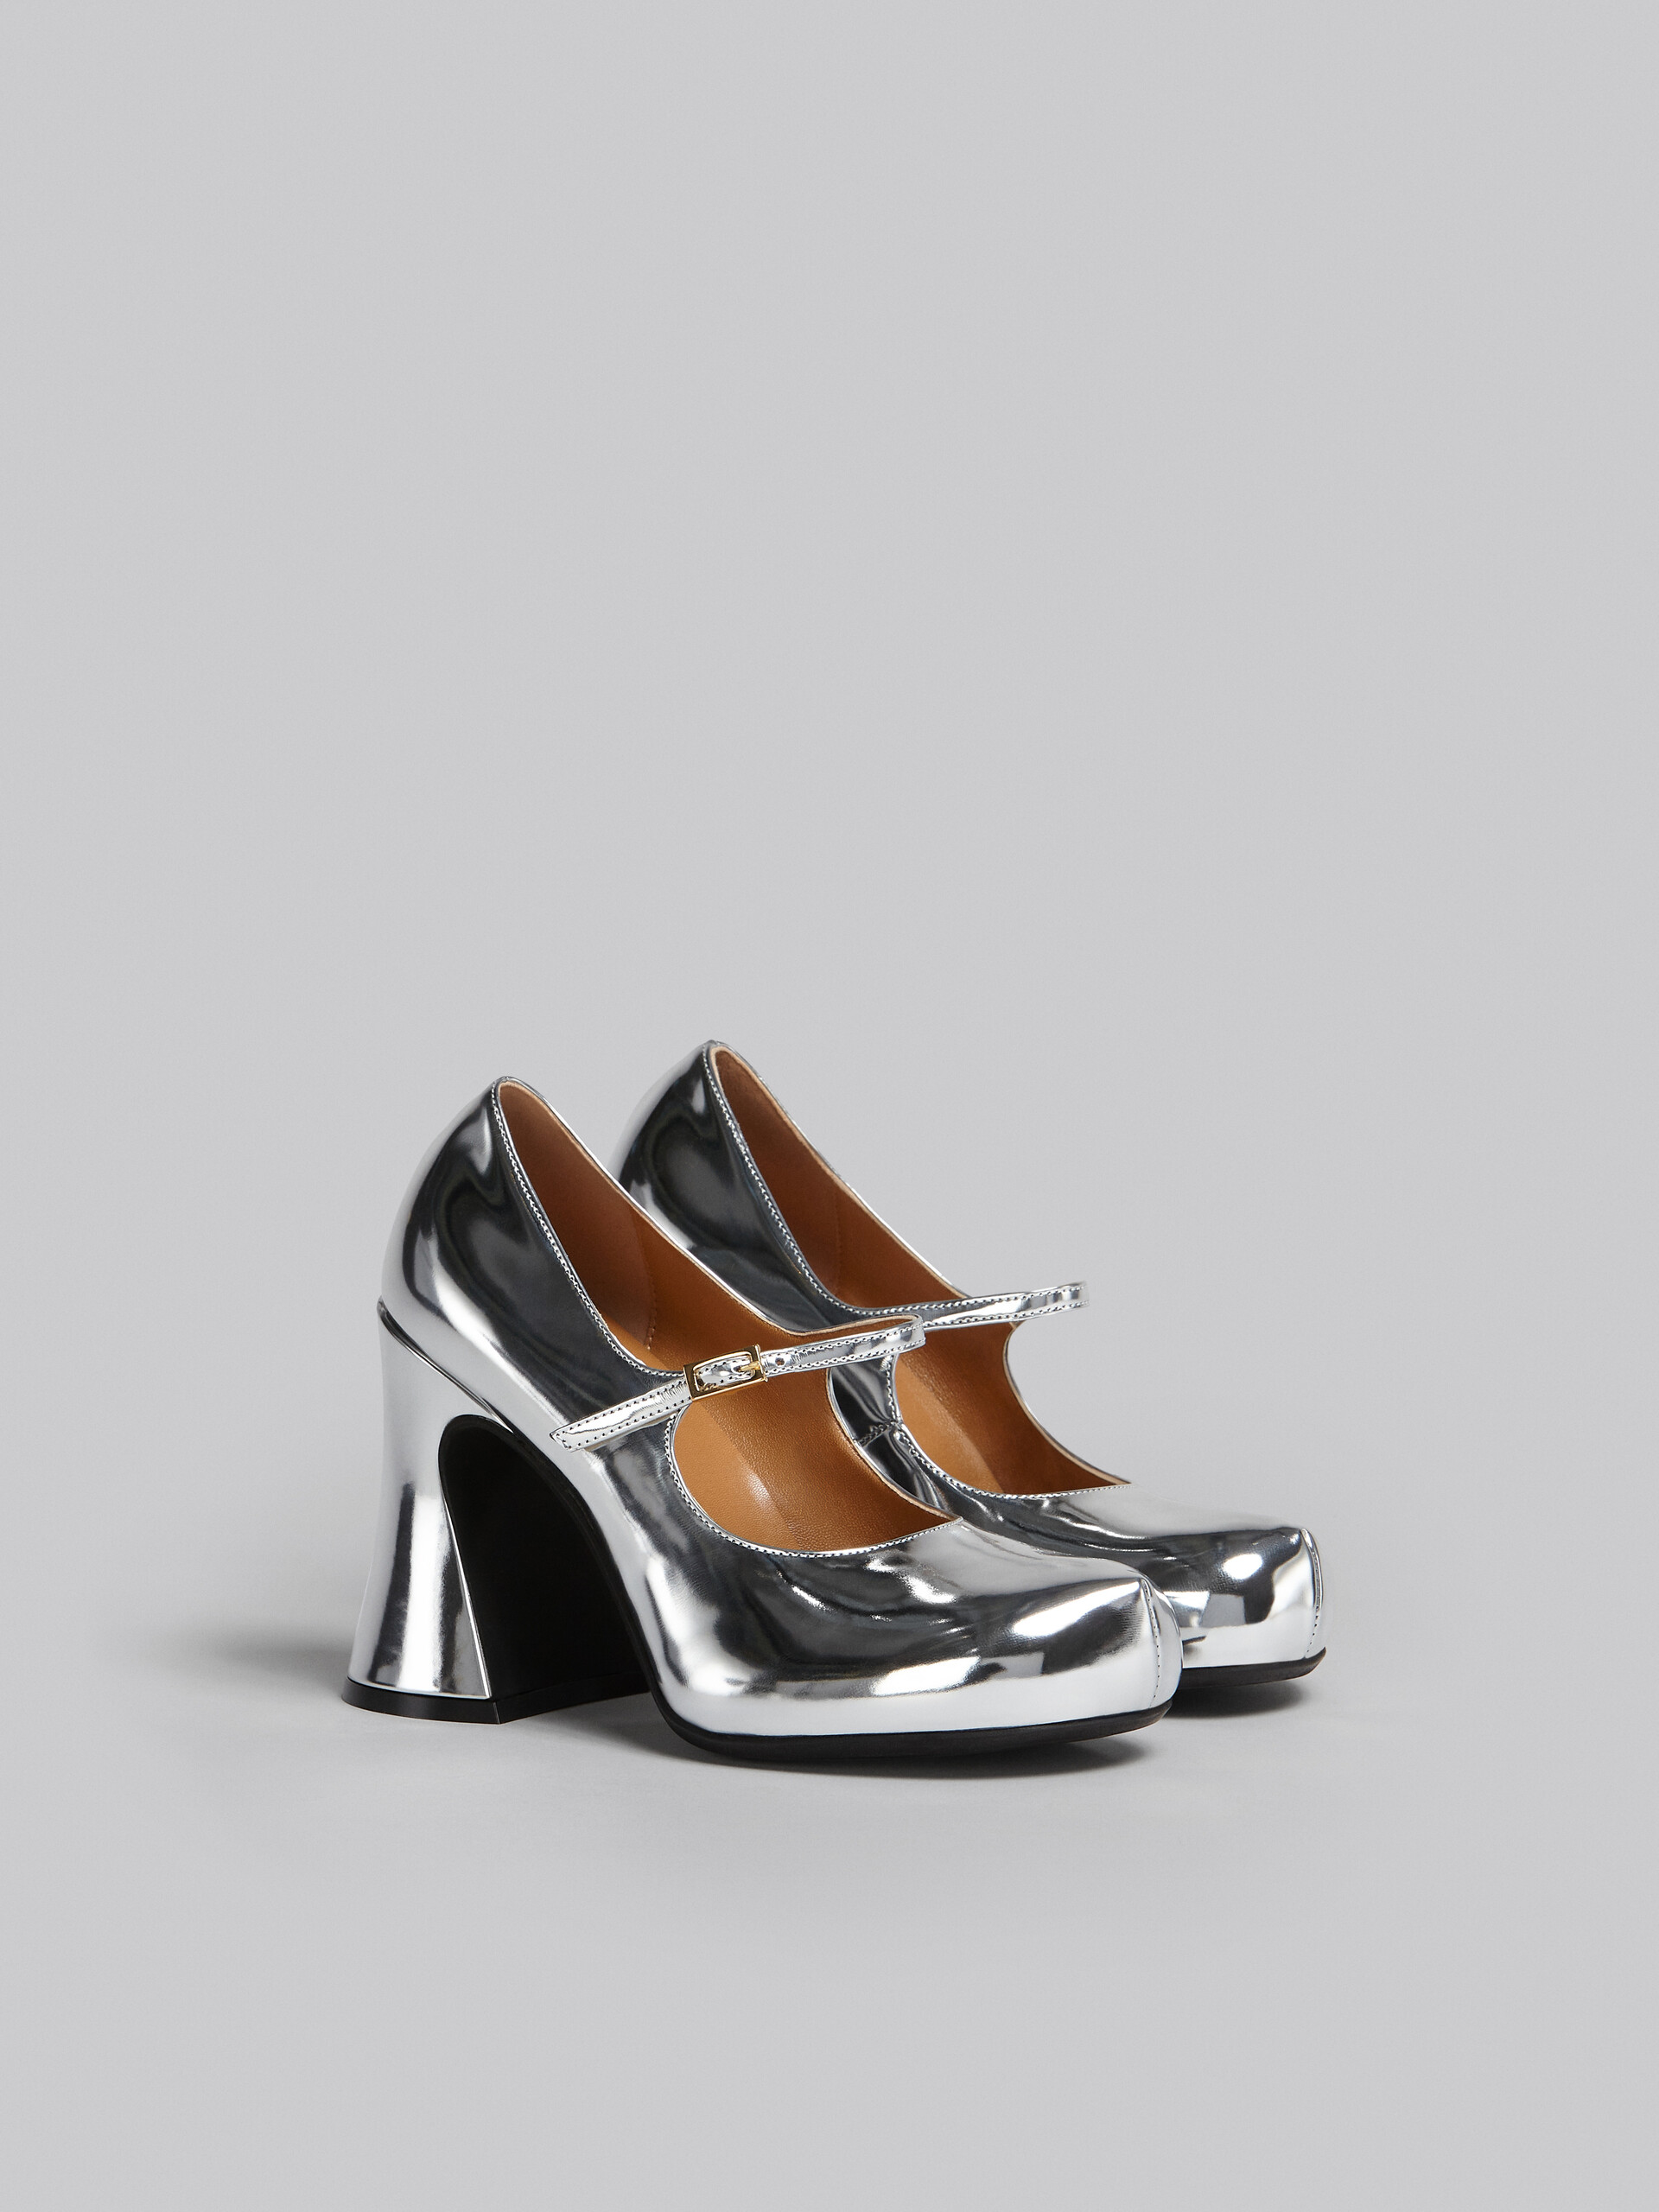 Silver mirrored leather Mary Janes - Sneakers - Image 2